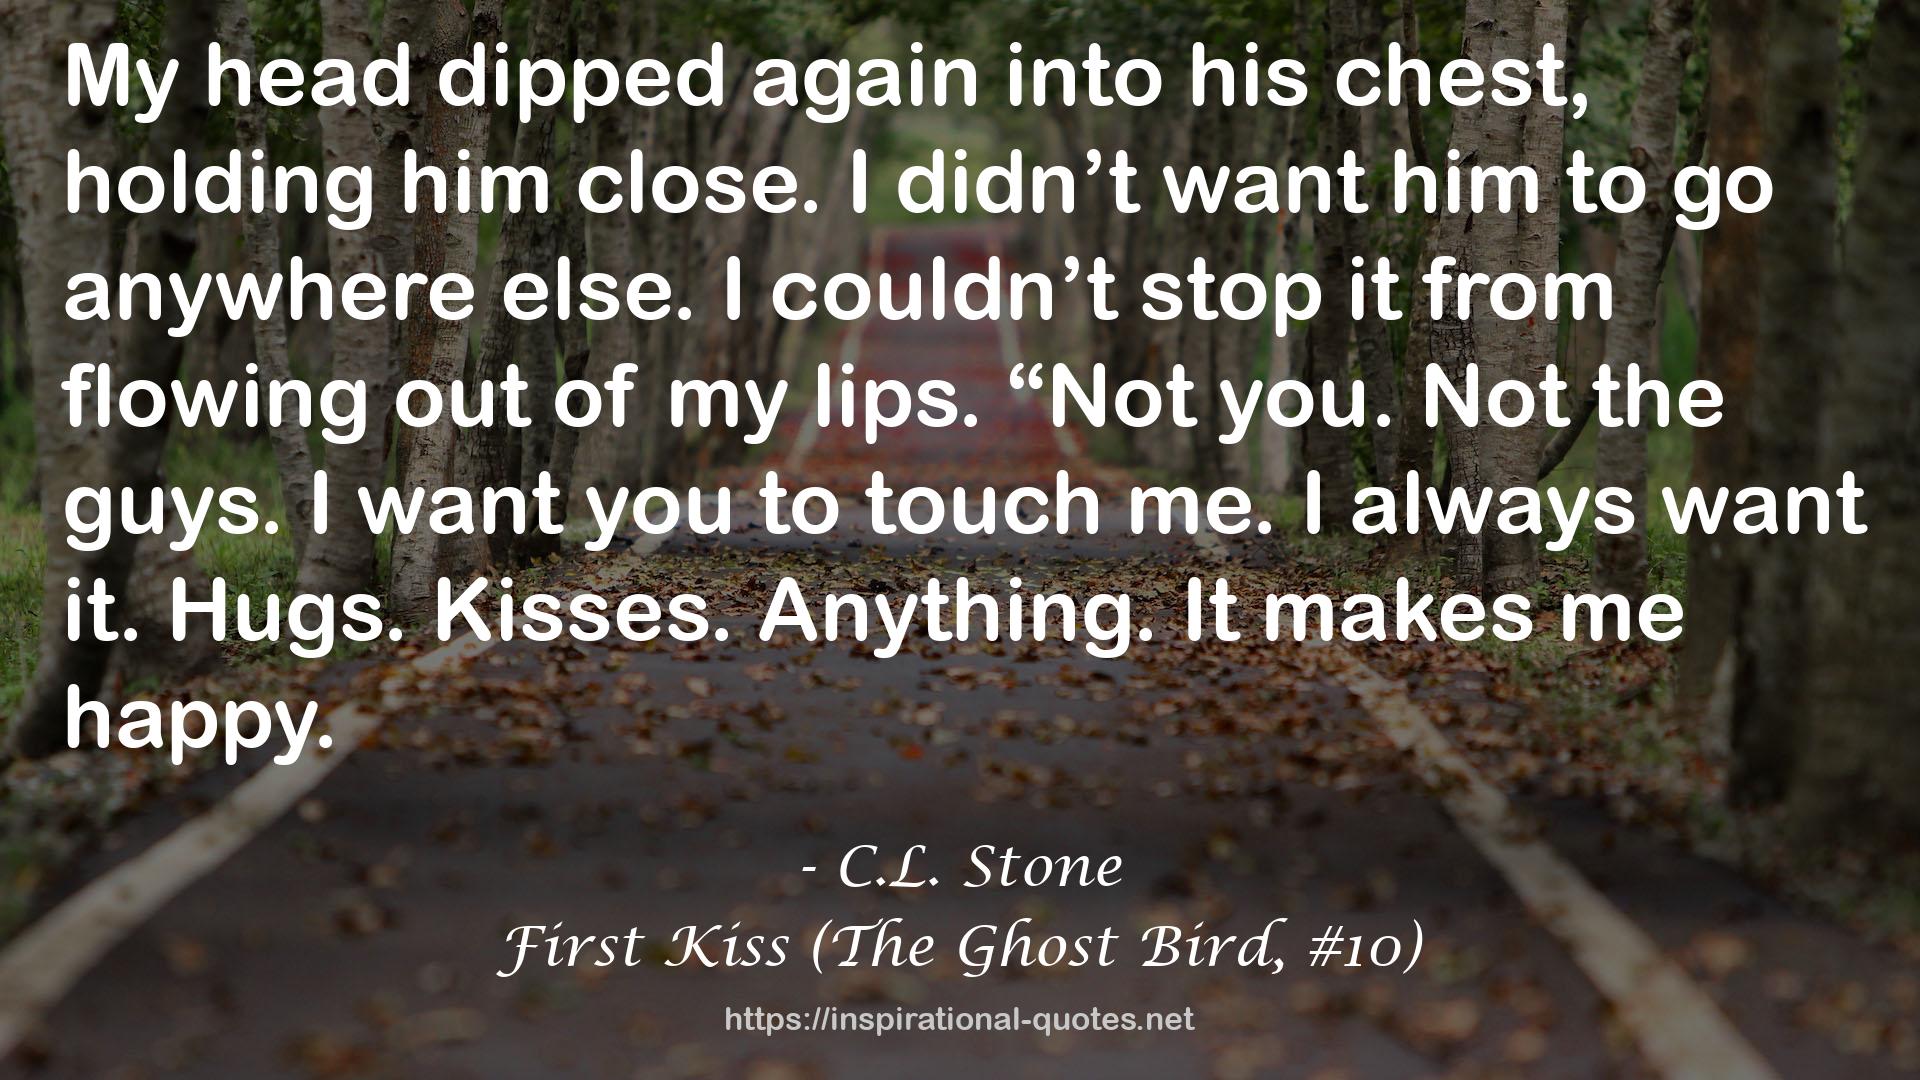 First Kiss (The Ghost Bird, #10) QUOTES